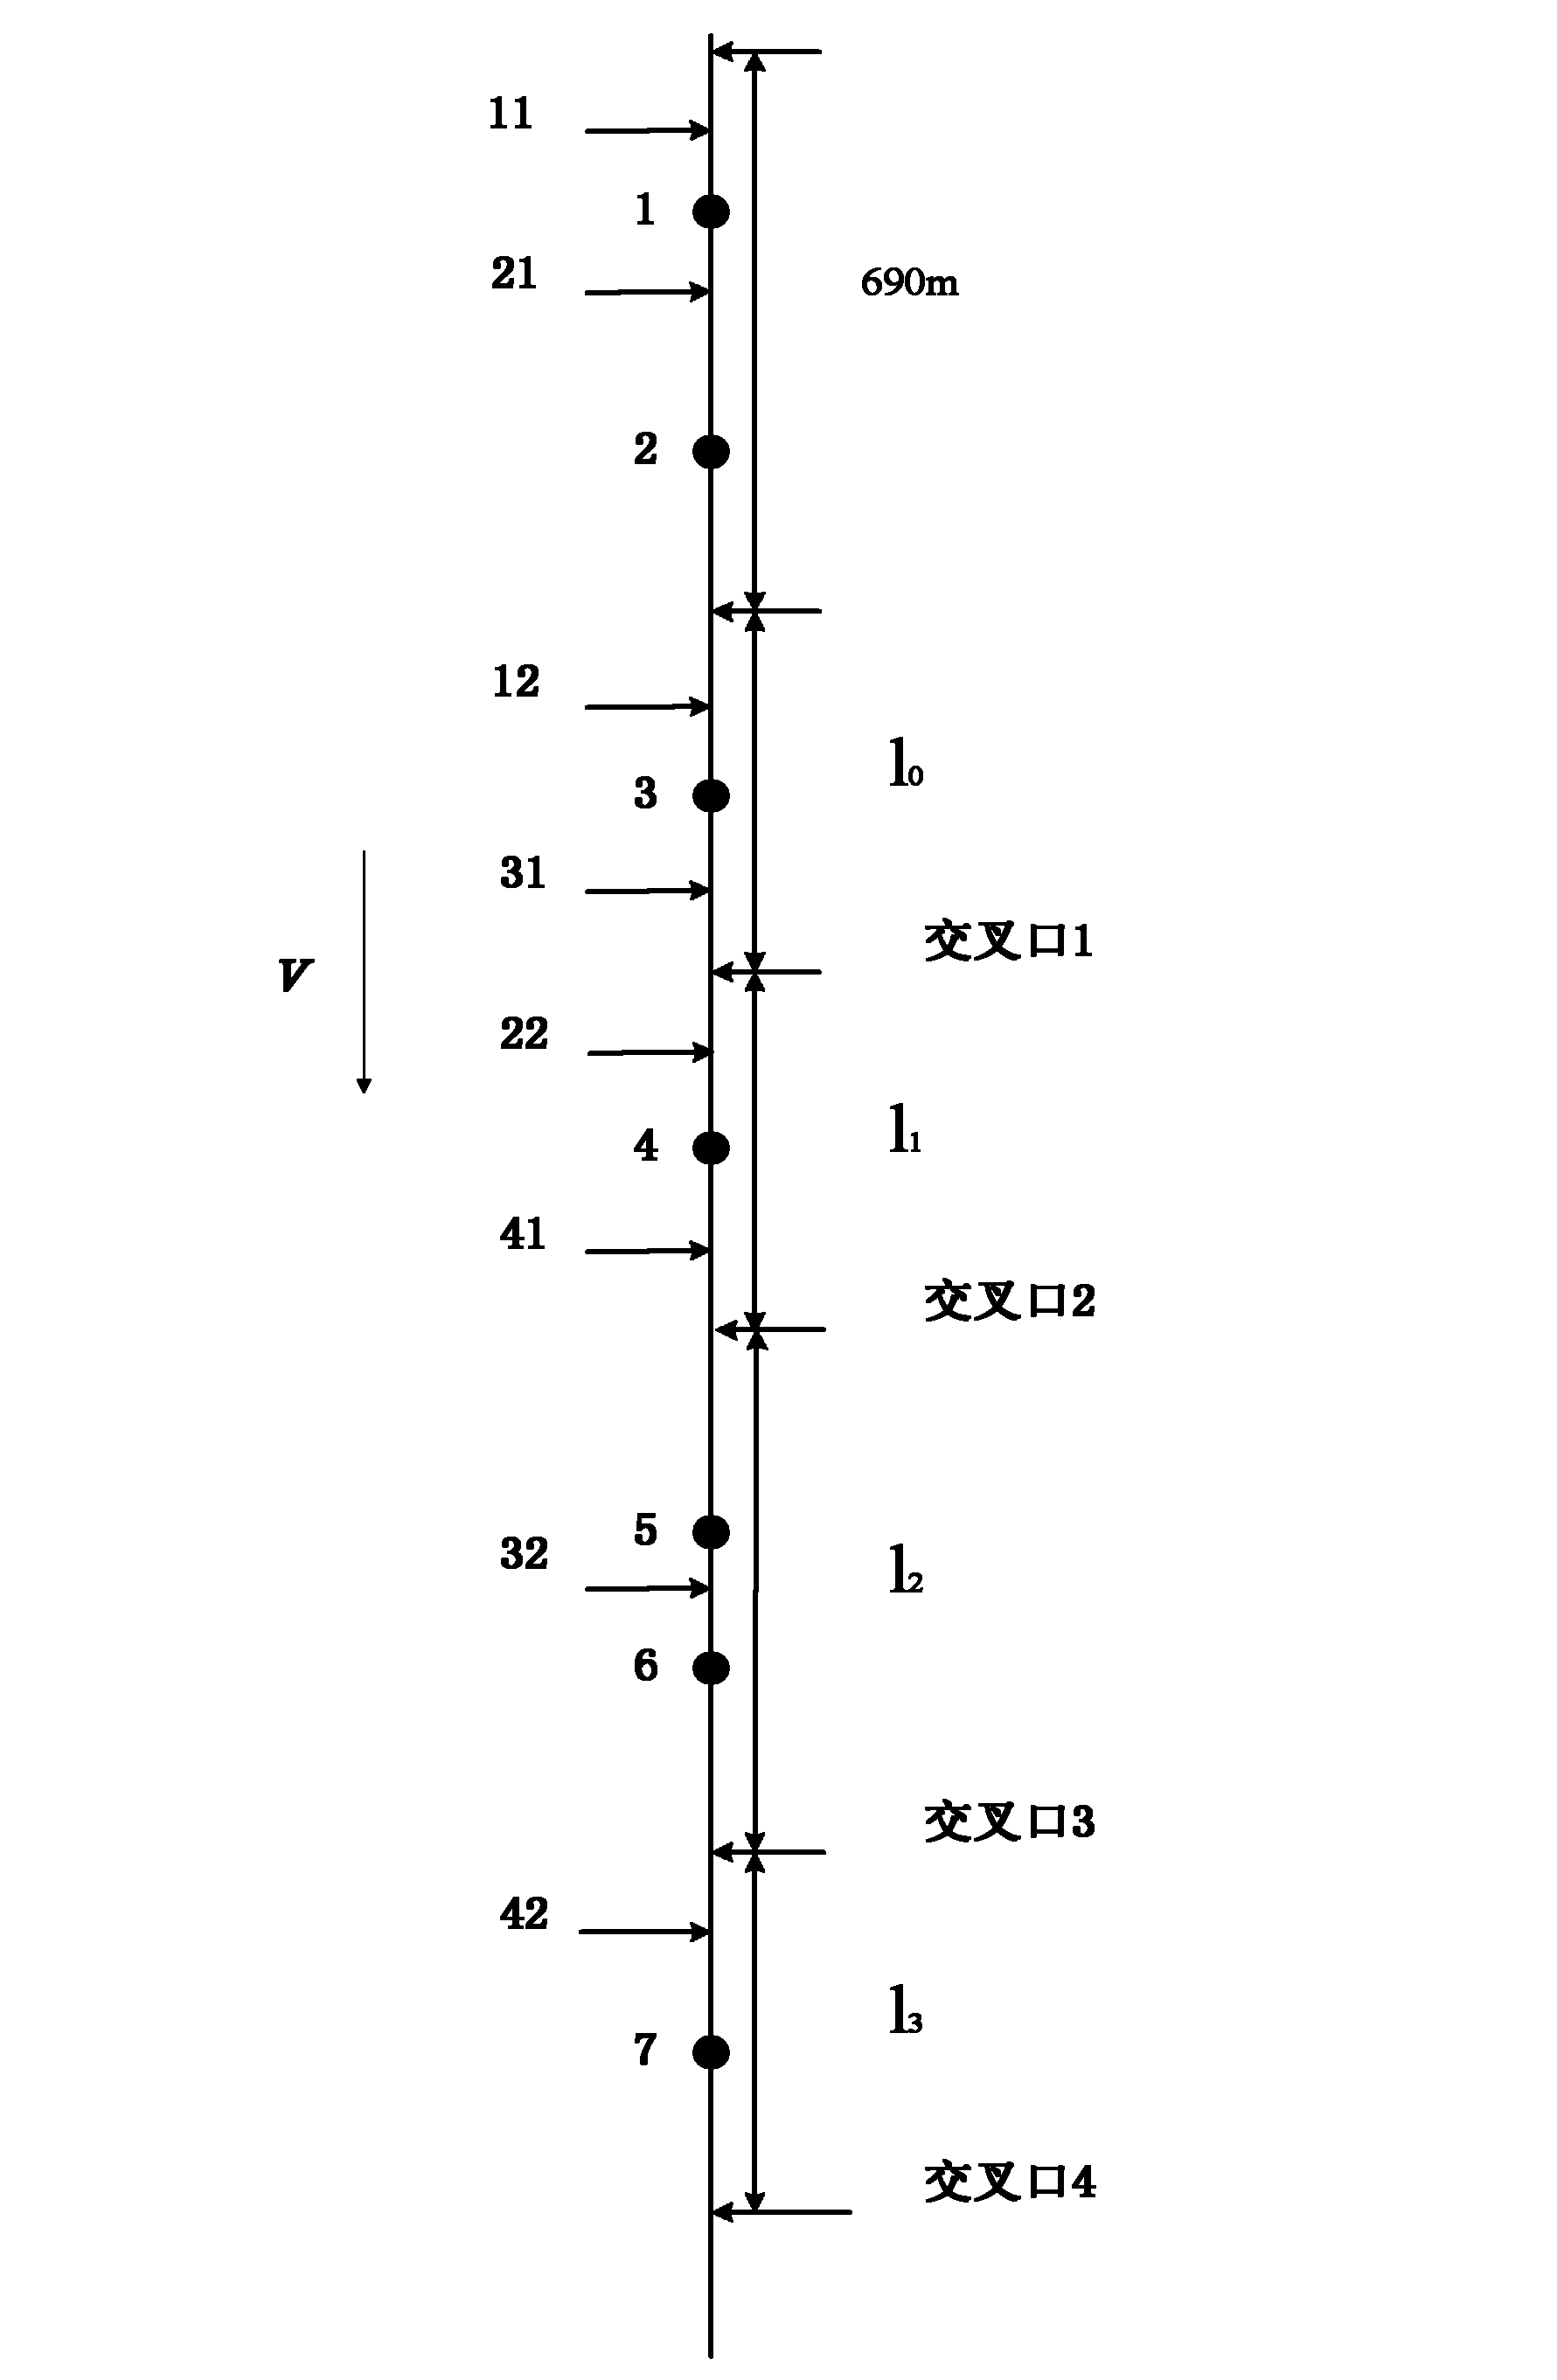 Crossing pre-induction signal priority control method used for rapid bus